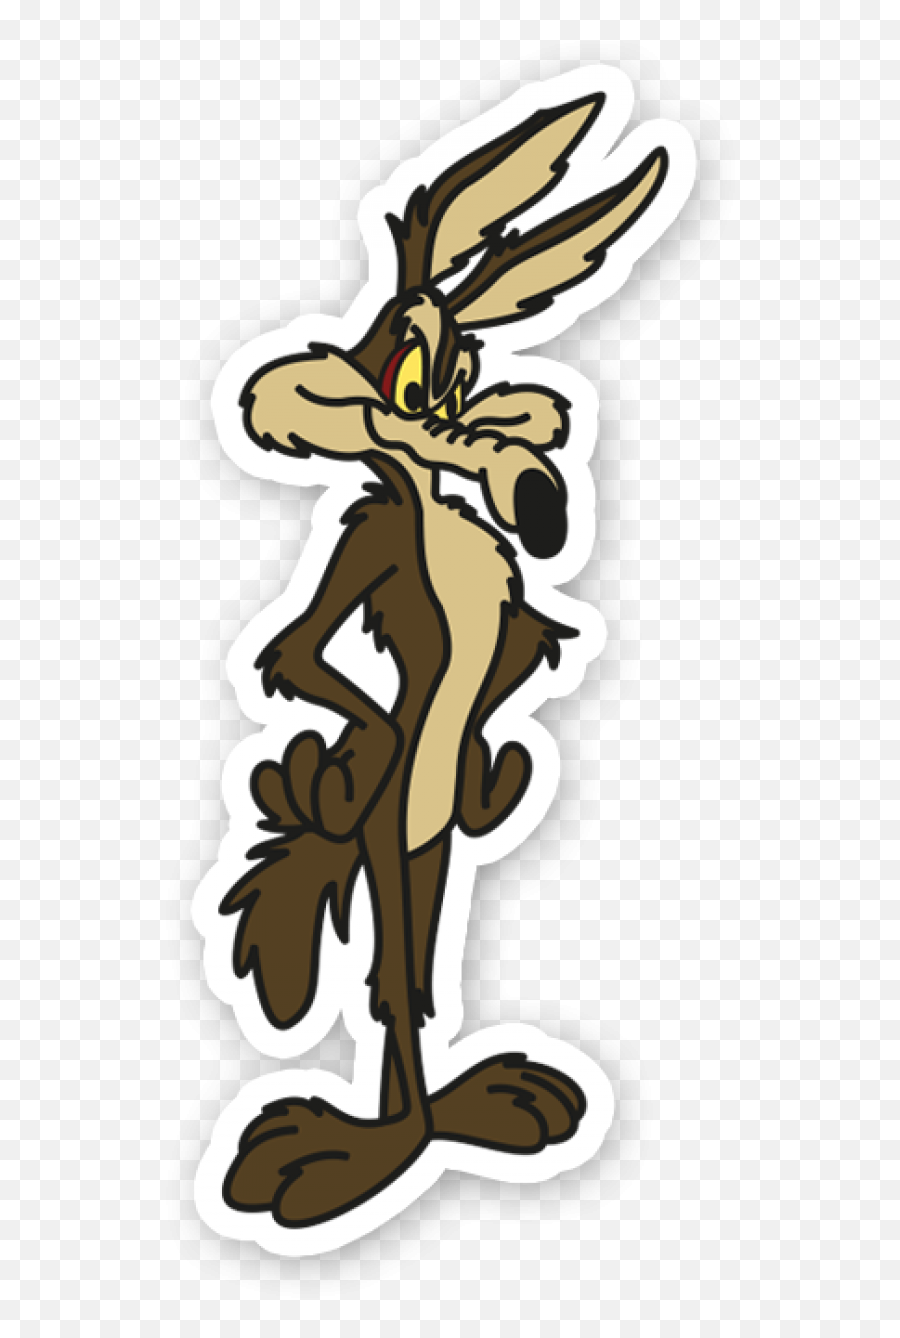 Willy Coyote Full Size Png Download Seekpng - Wile E Coyote Looney Tunes Road Runner,Coyote Png